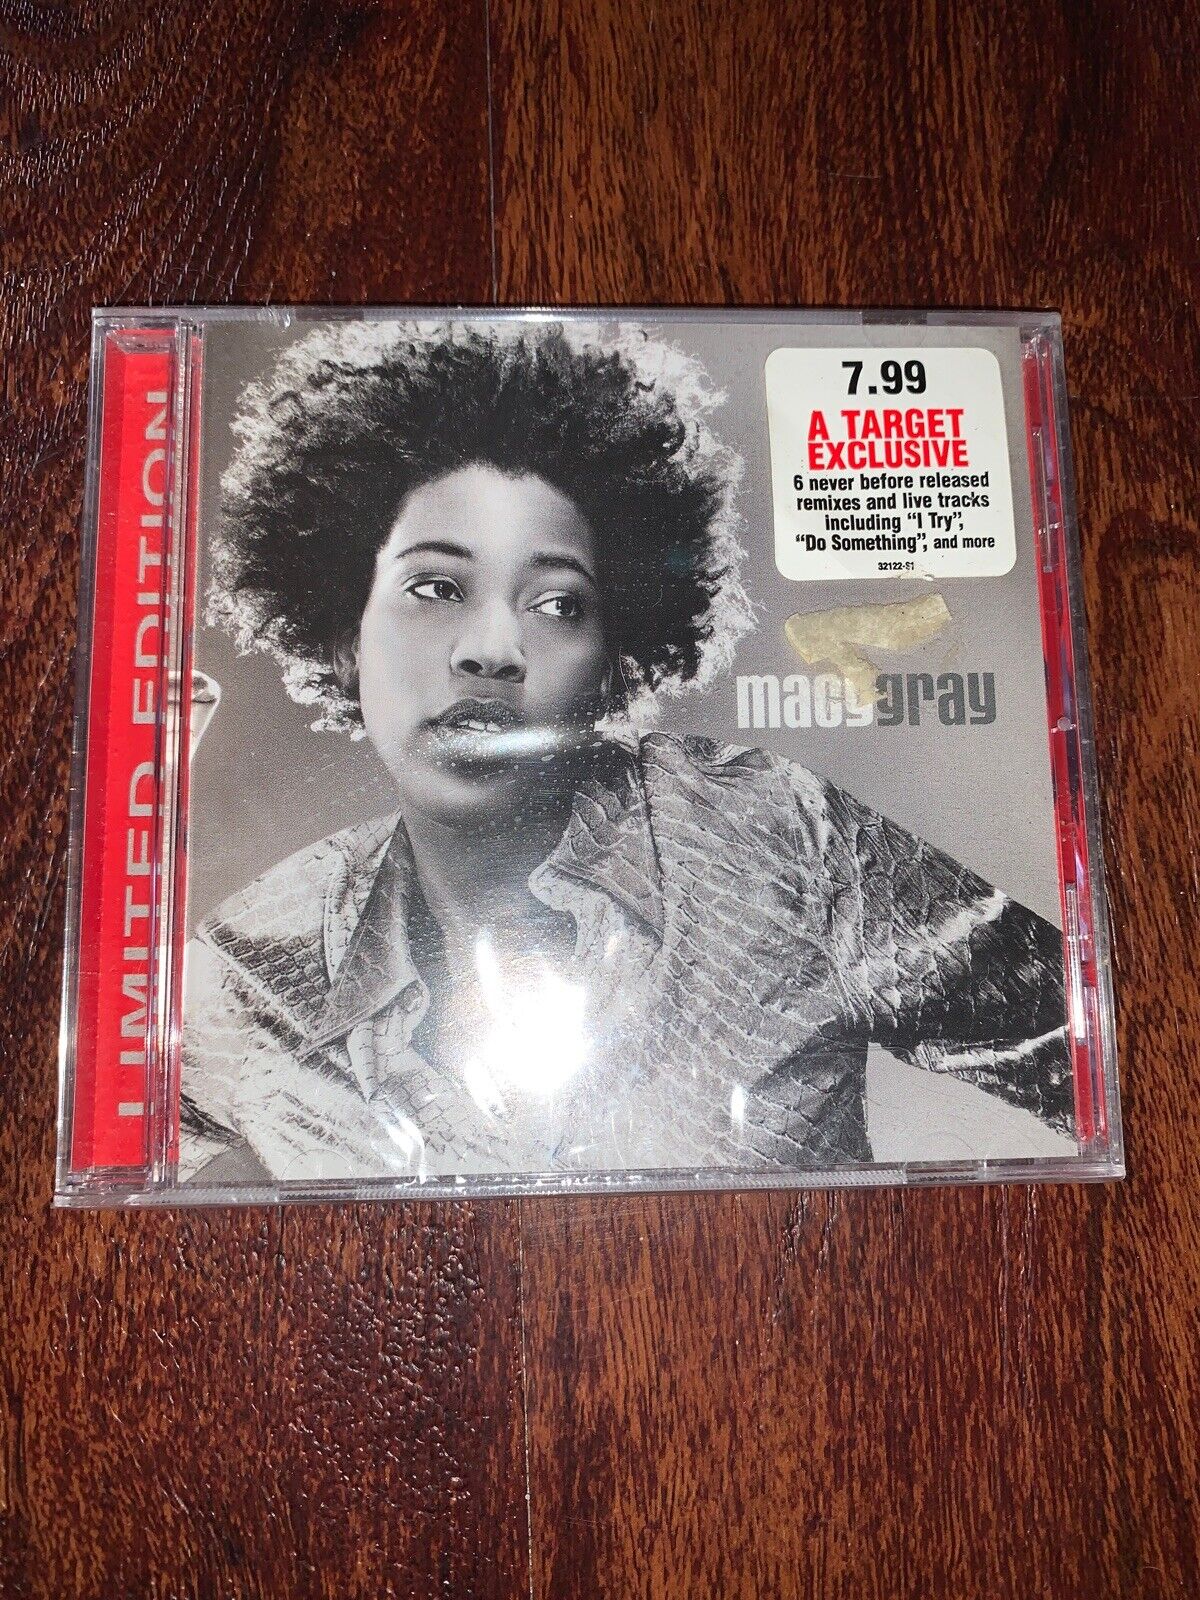 (CD) Macy Gray - Macy Gray (Limited Edition) [2000, Epic] 6 Track Sealed Target